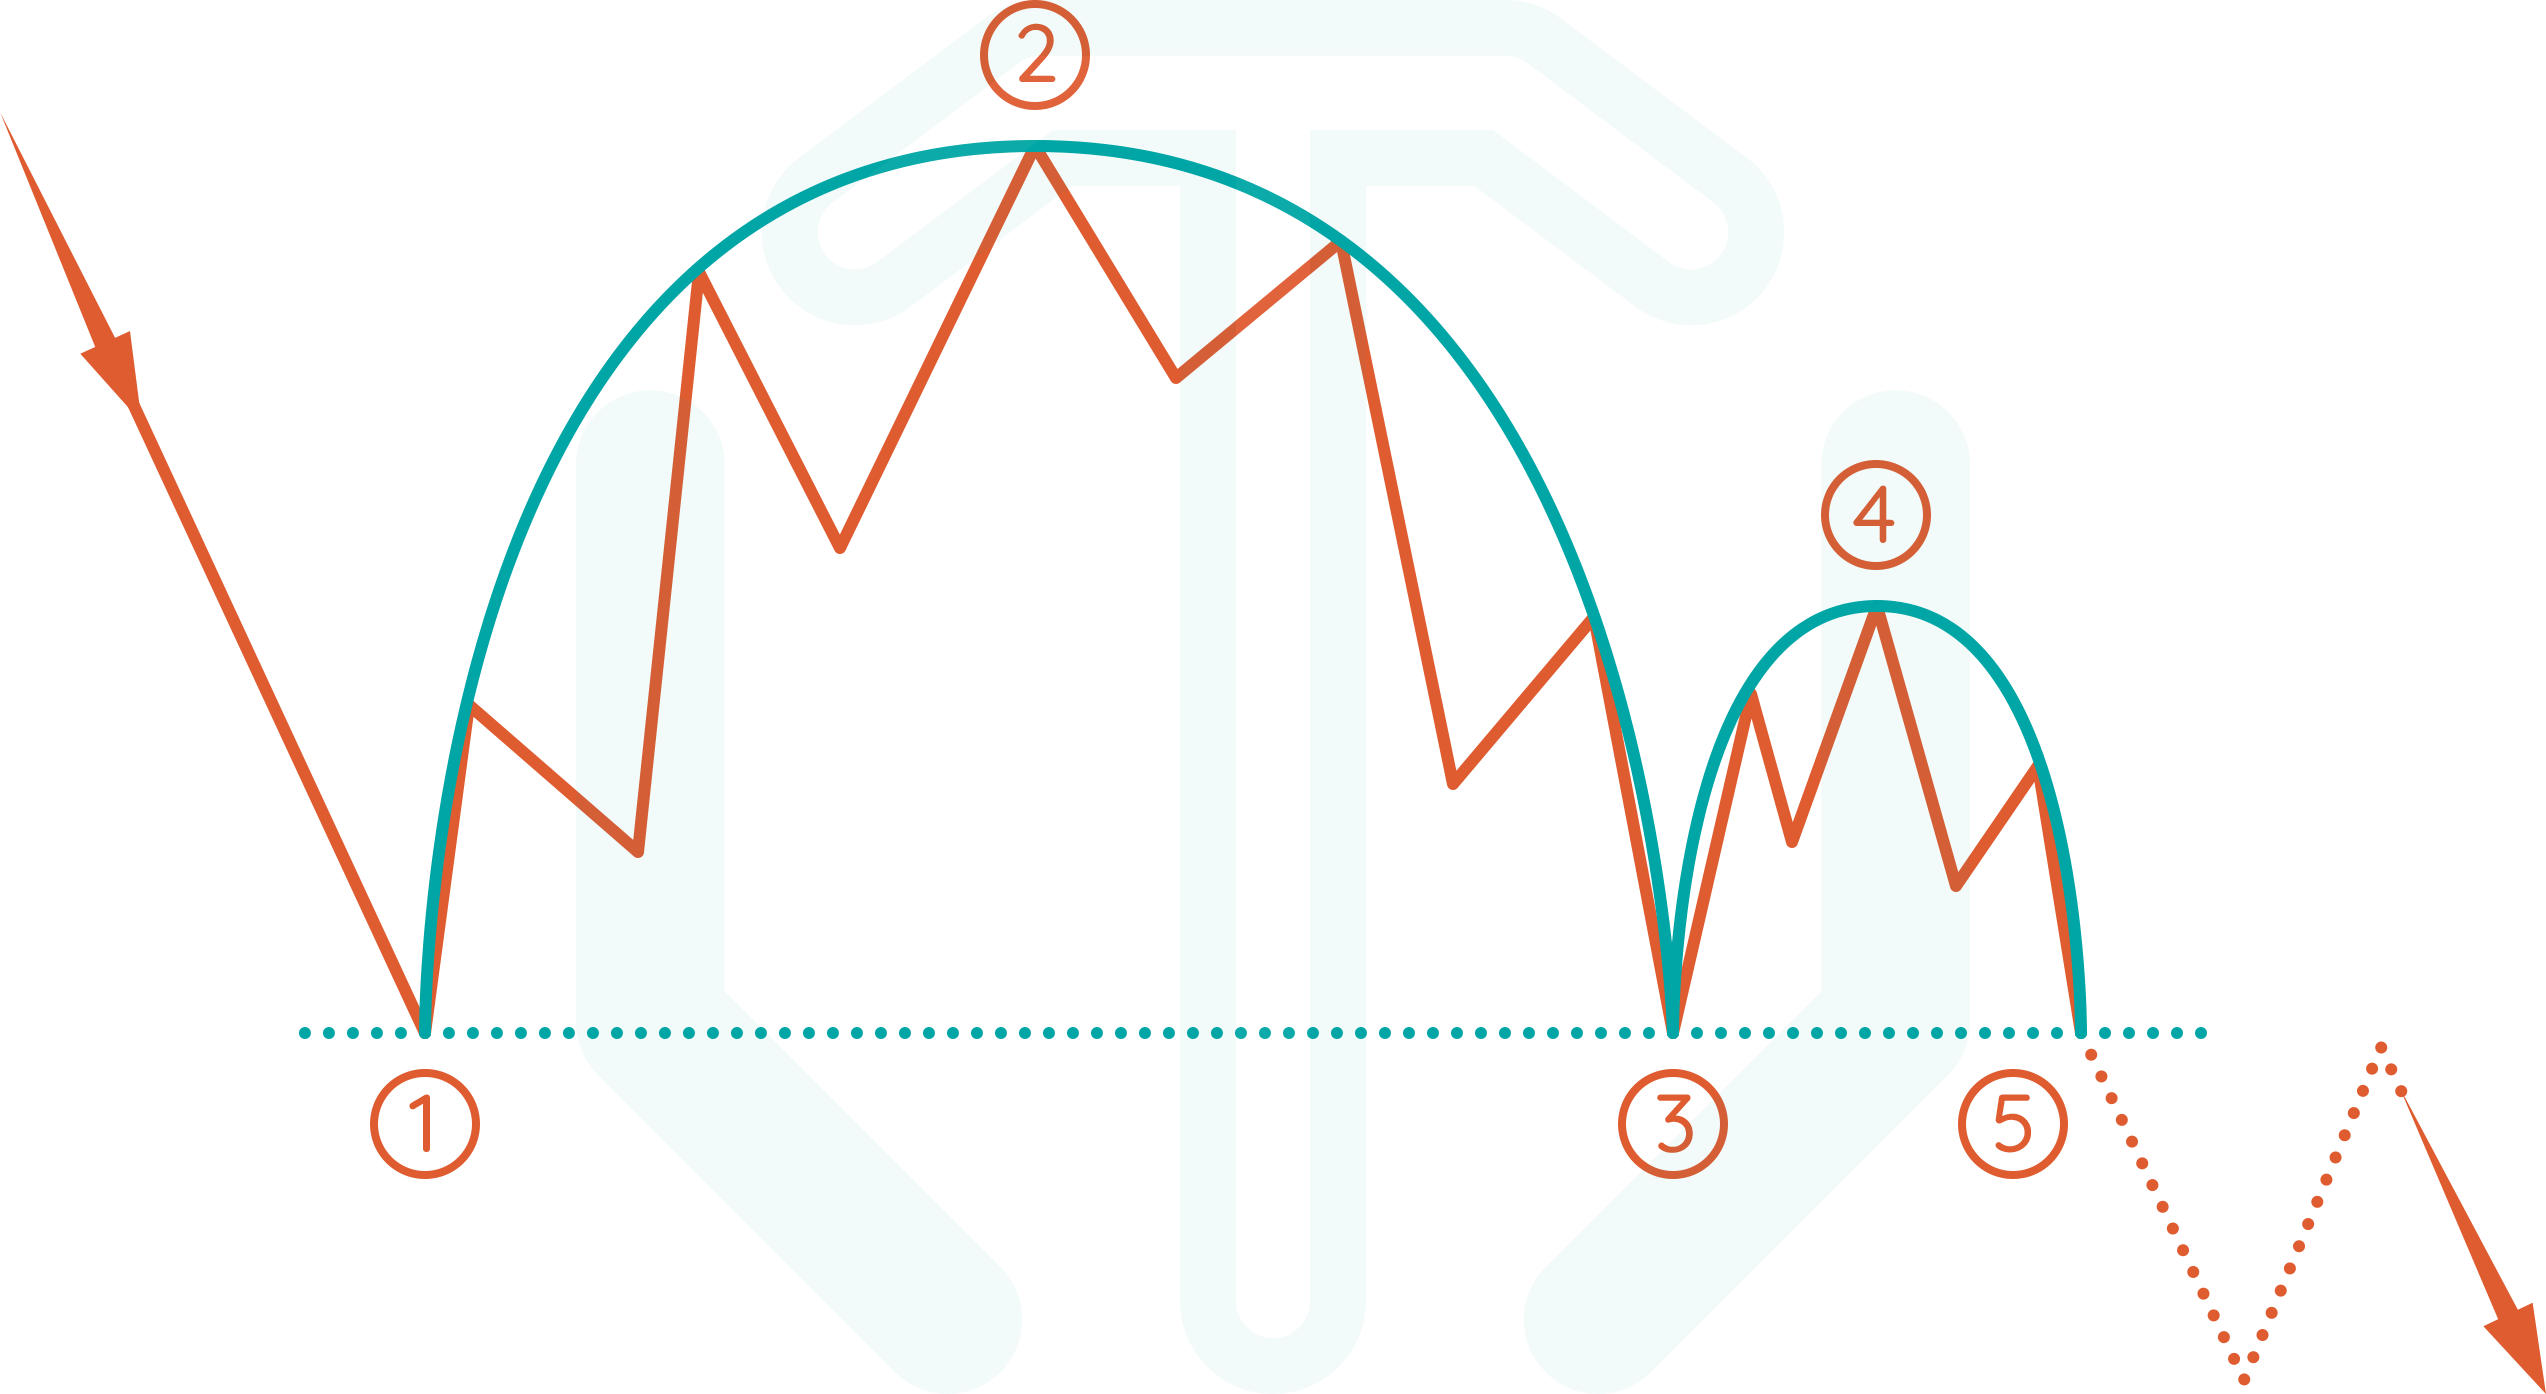 Inverted cup and handle chart pattern illustration